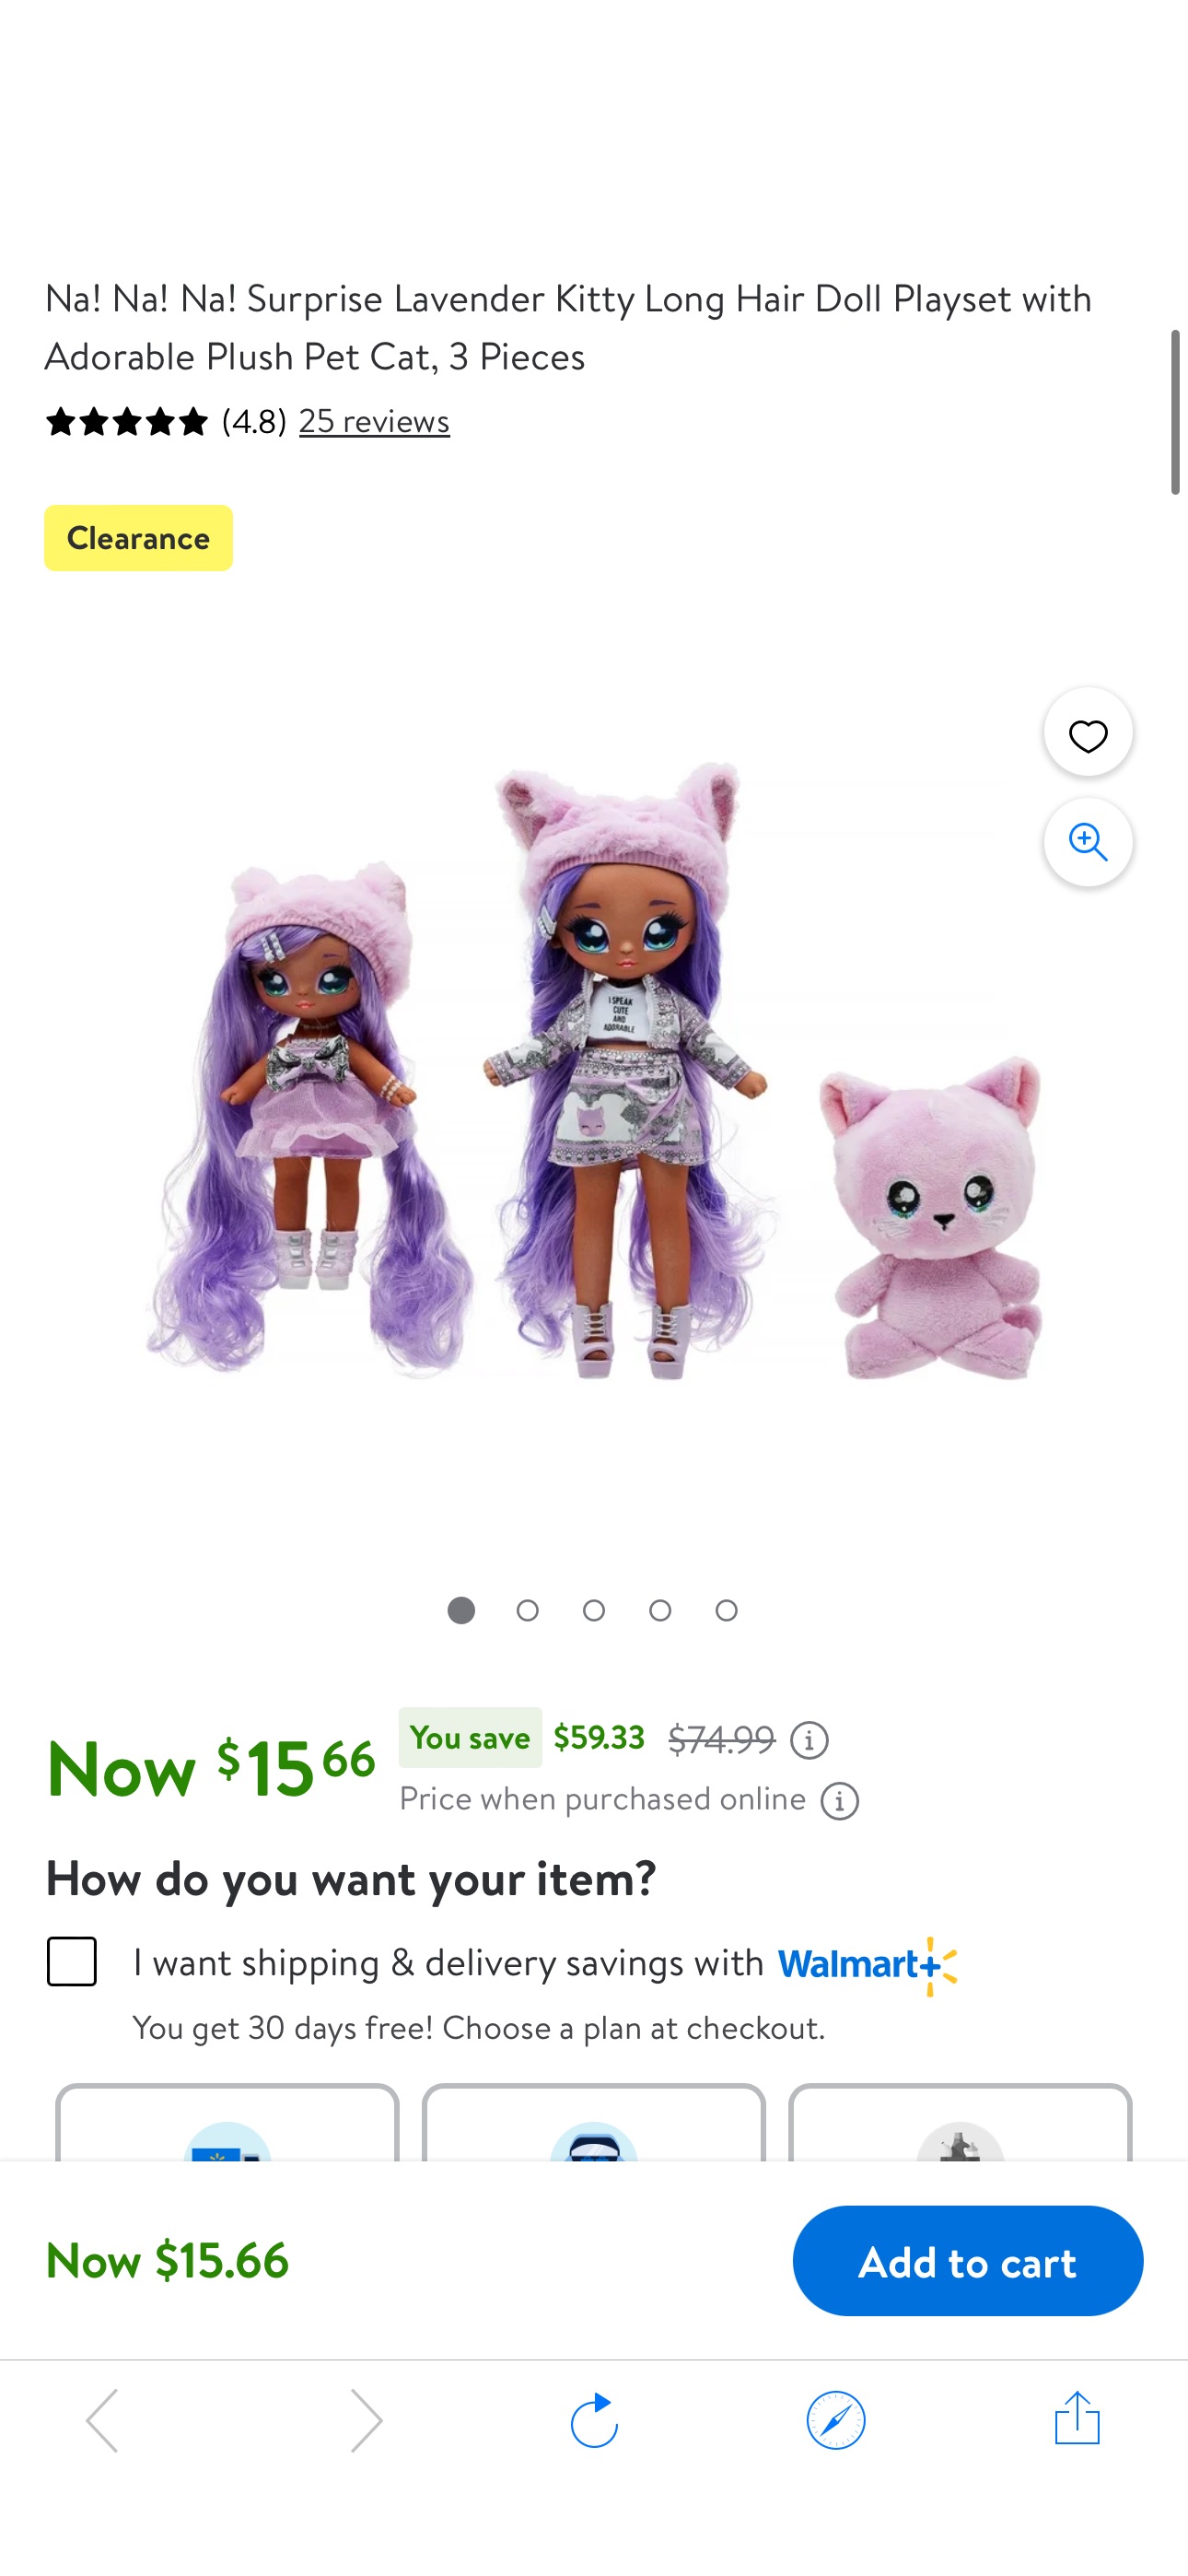 Na! Na! Na! Surprise Lavender Kitty Long Hair Doll Playset with Adorable Plush Pet Cat, 3 Pieces - Walmart.com